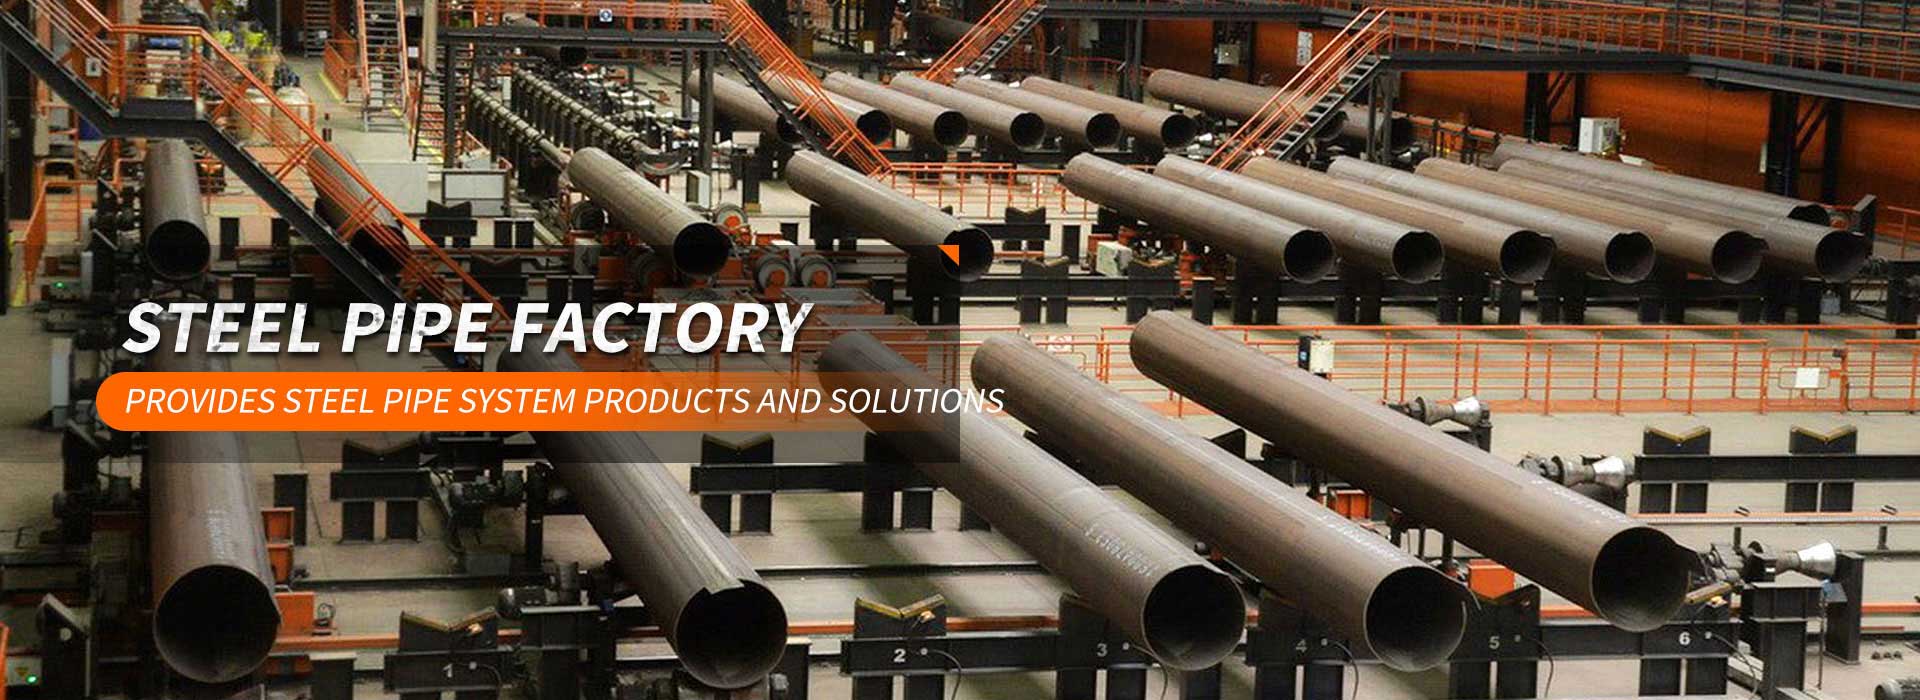 Oil Country Tubular Goods,welded steel pipe,hollow seciton,alloy steel pipe,ssaw steel pipe